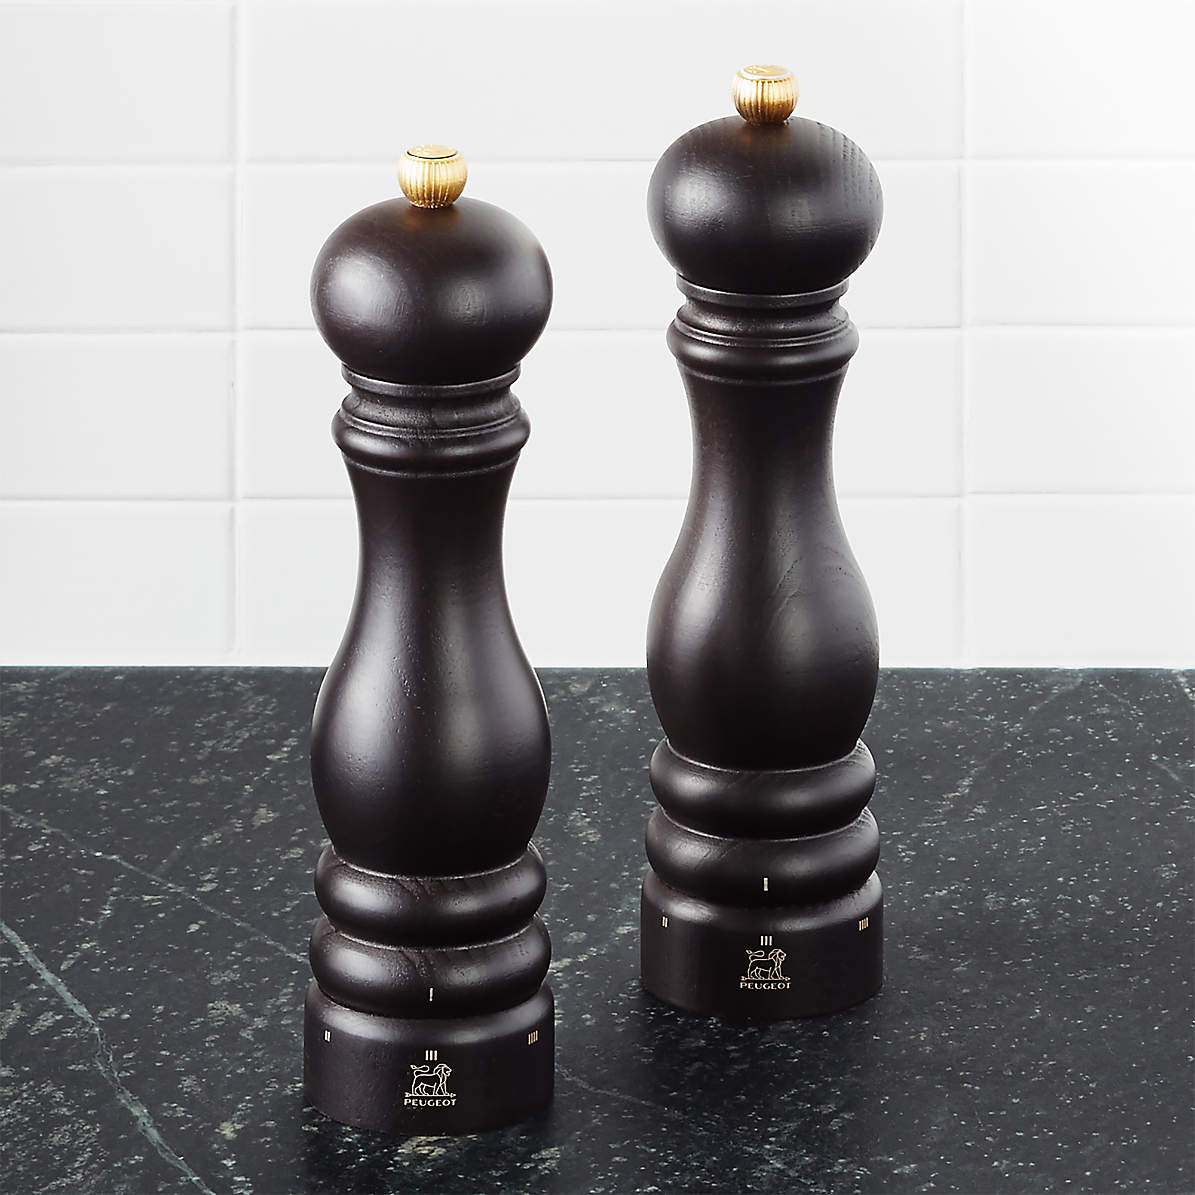 Peugeot Pepper Mill 8.5 inch Chocolate 